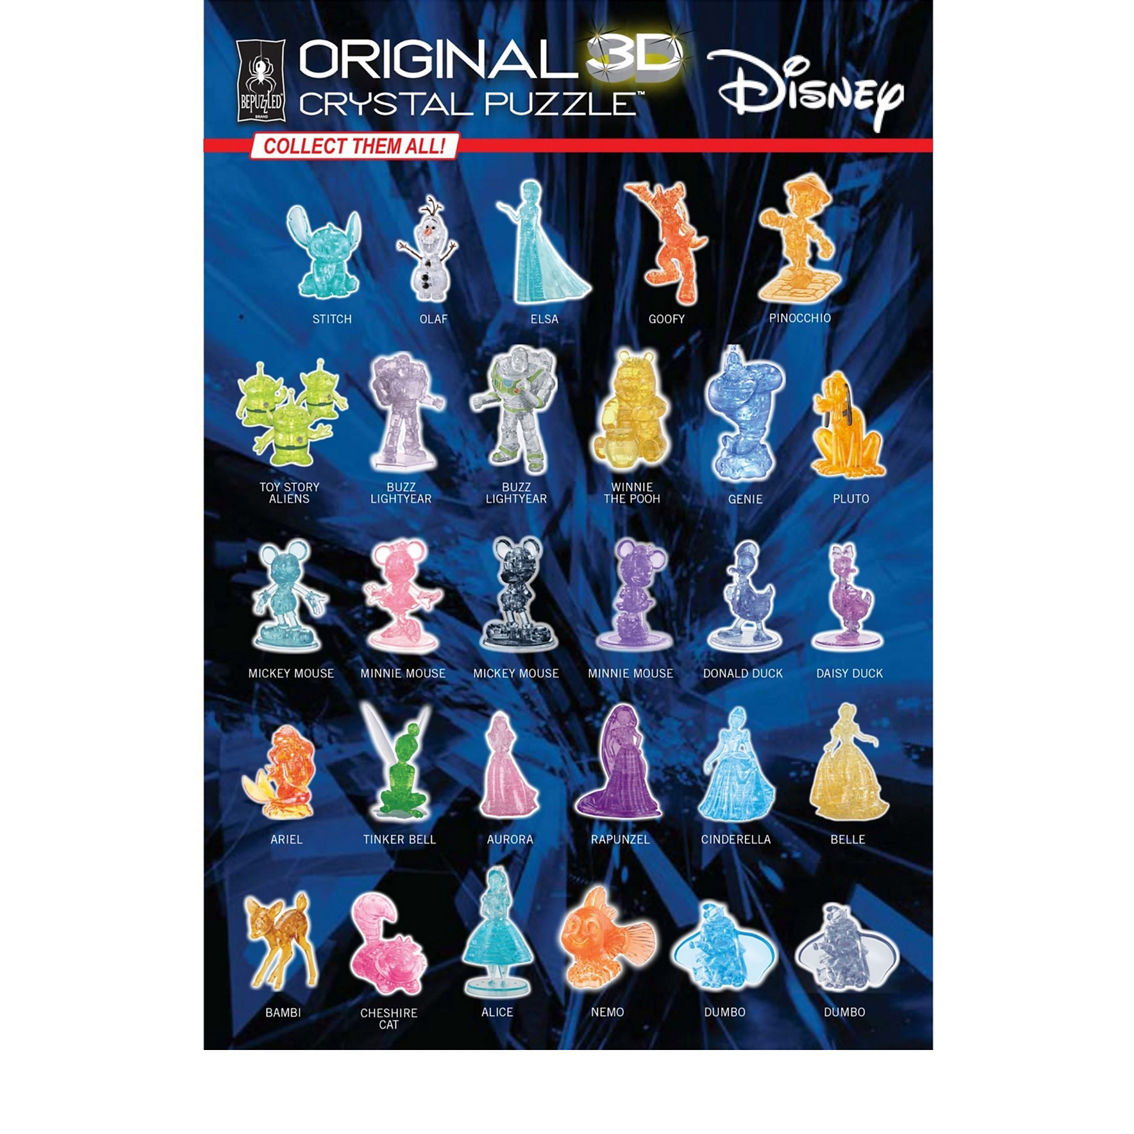 BePuzzled 3D Crystal Puzzle - Disney Stitch (Pink): 43 Pcs - Image 4 of 5